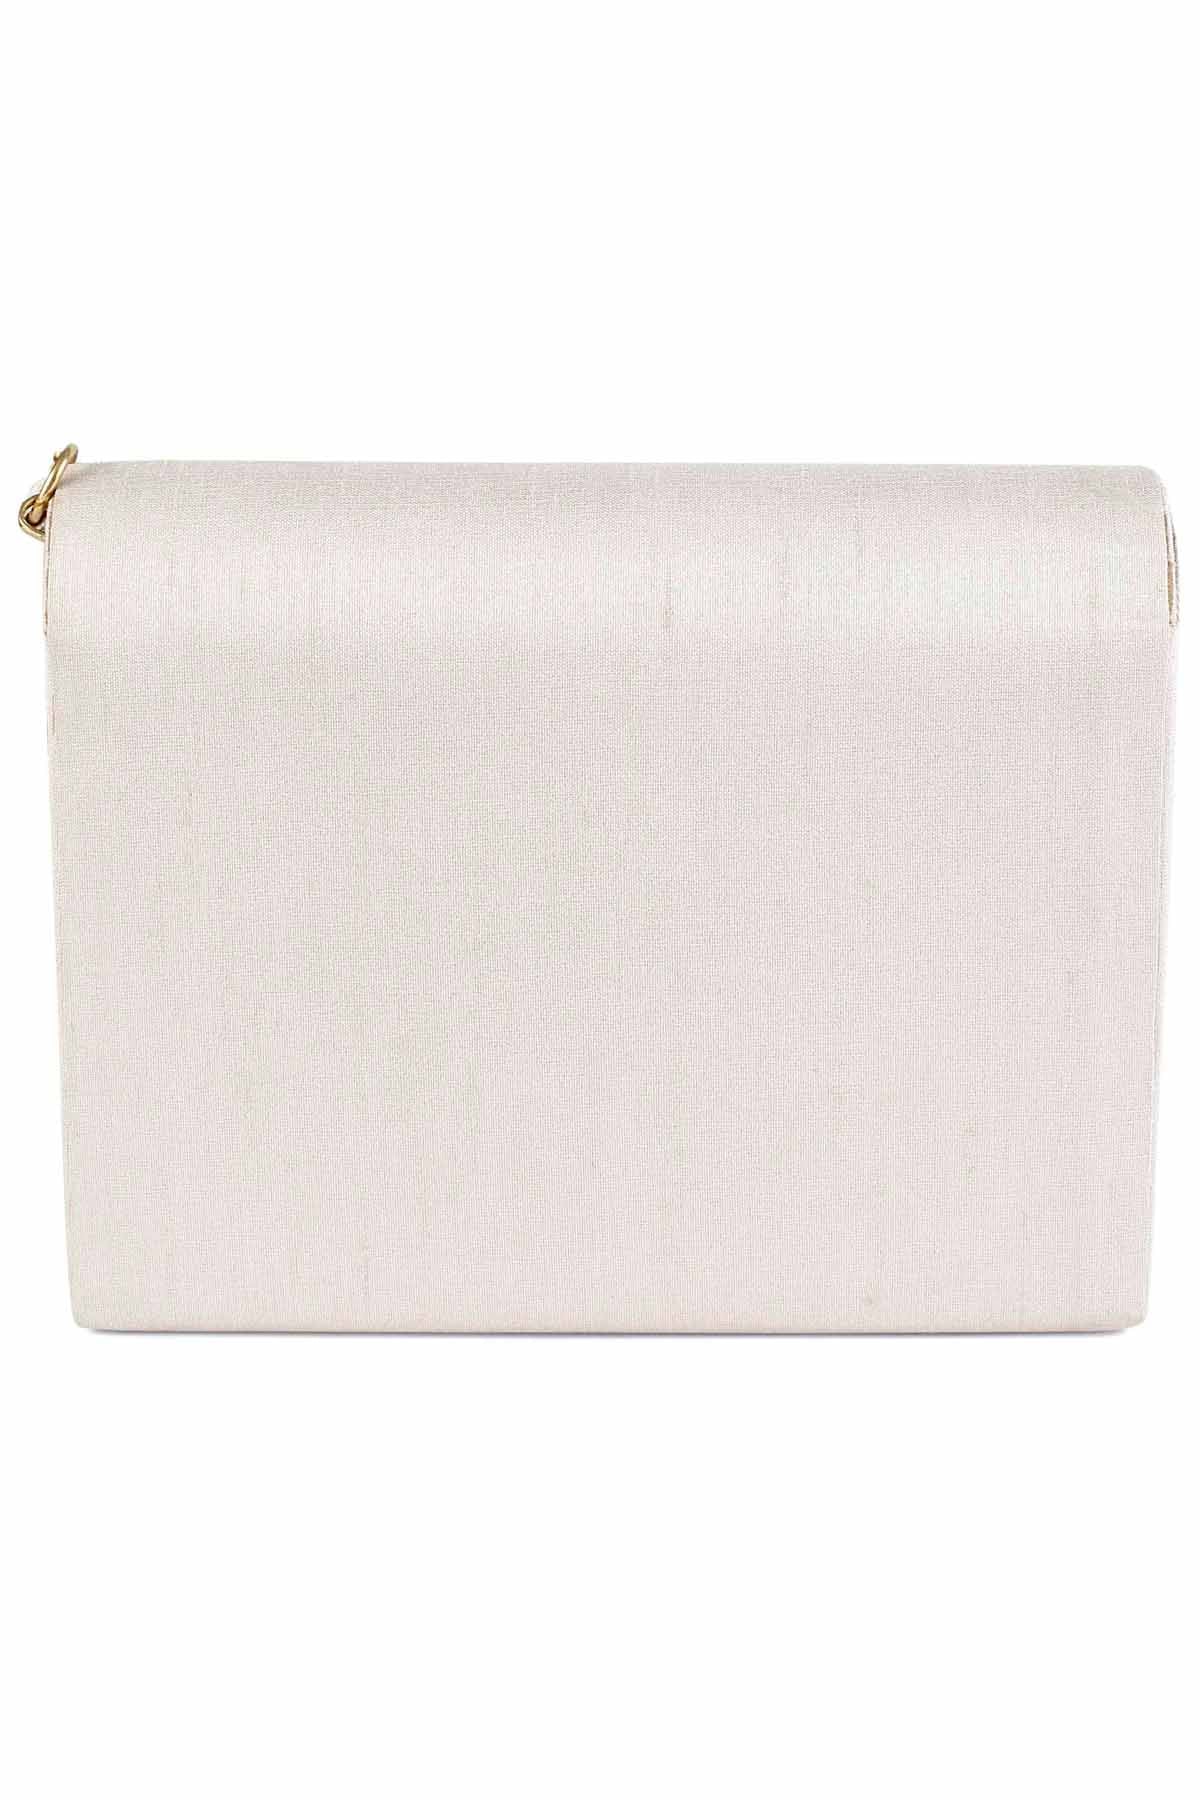 Motif Embroidered Clutch